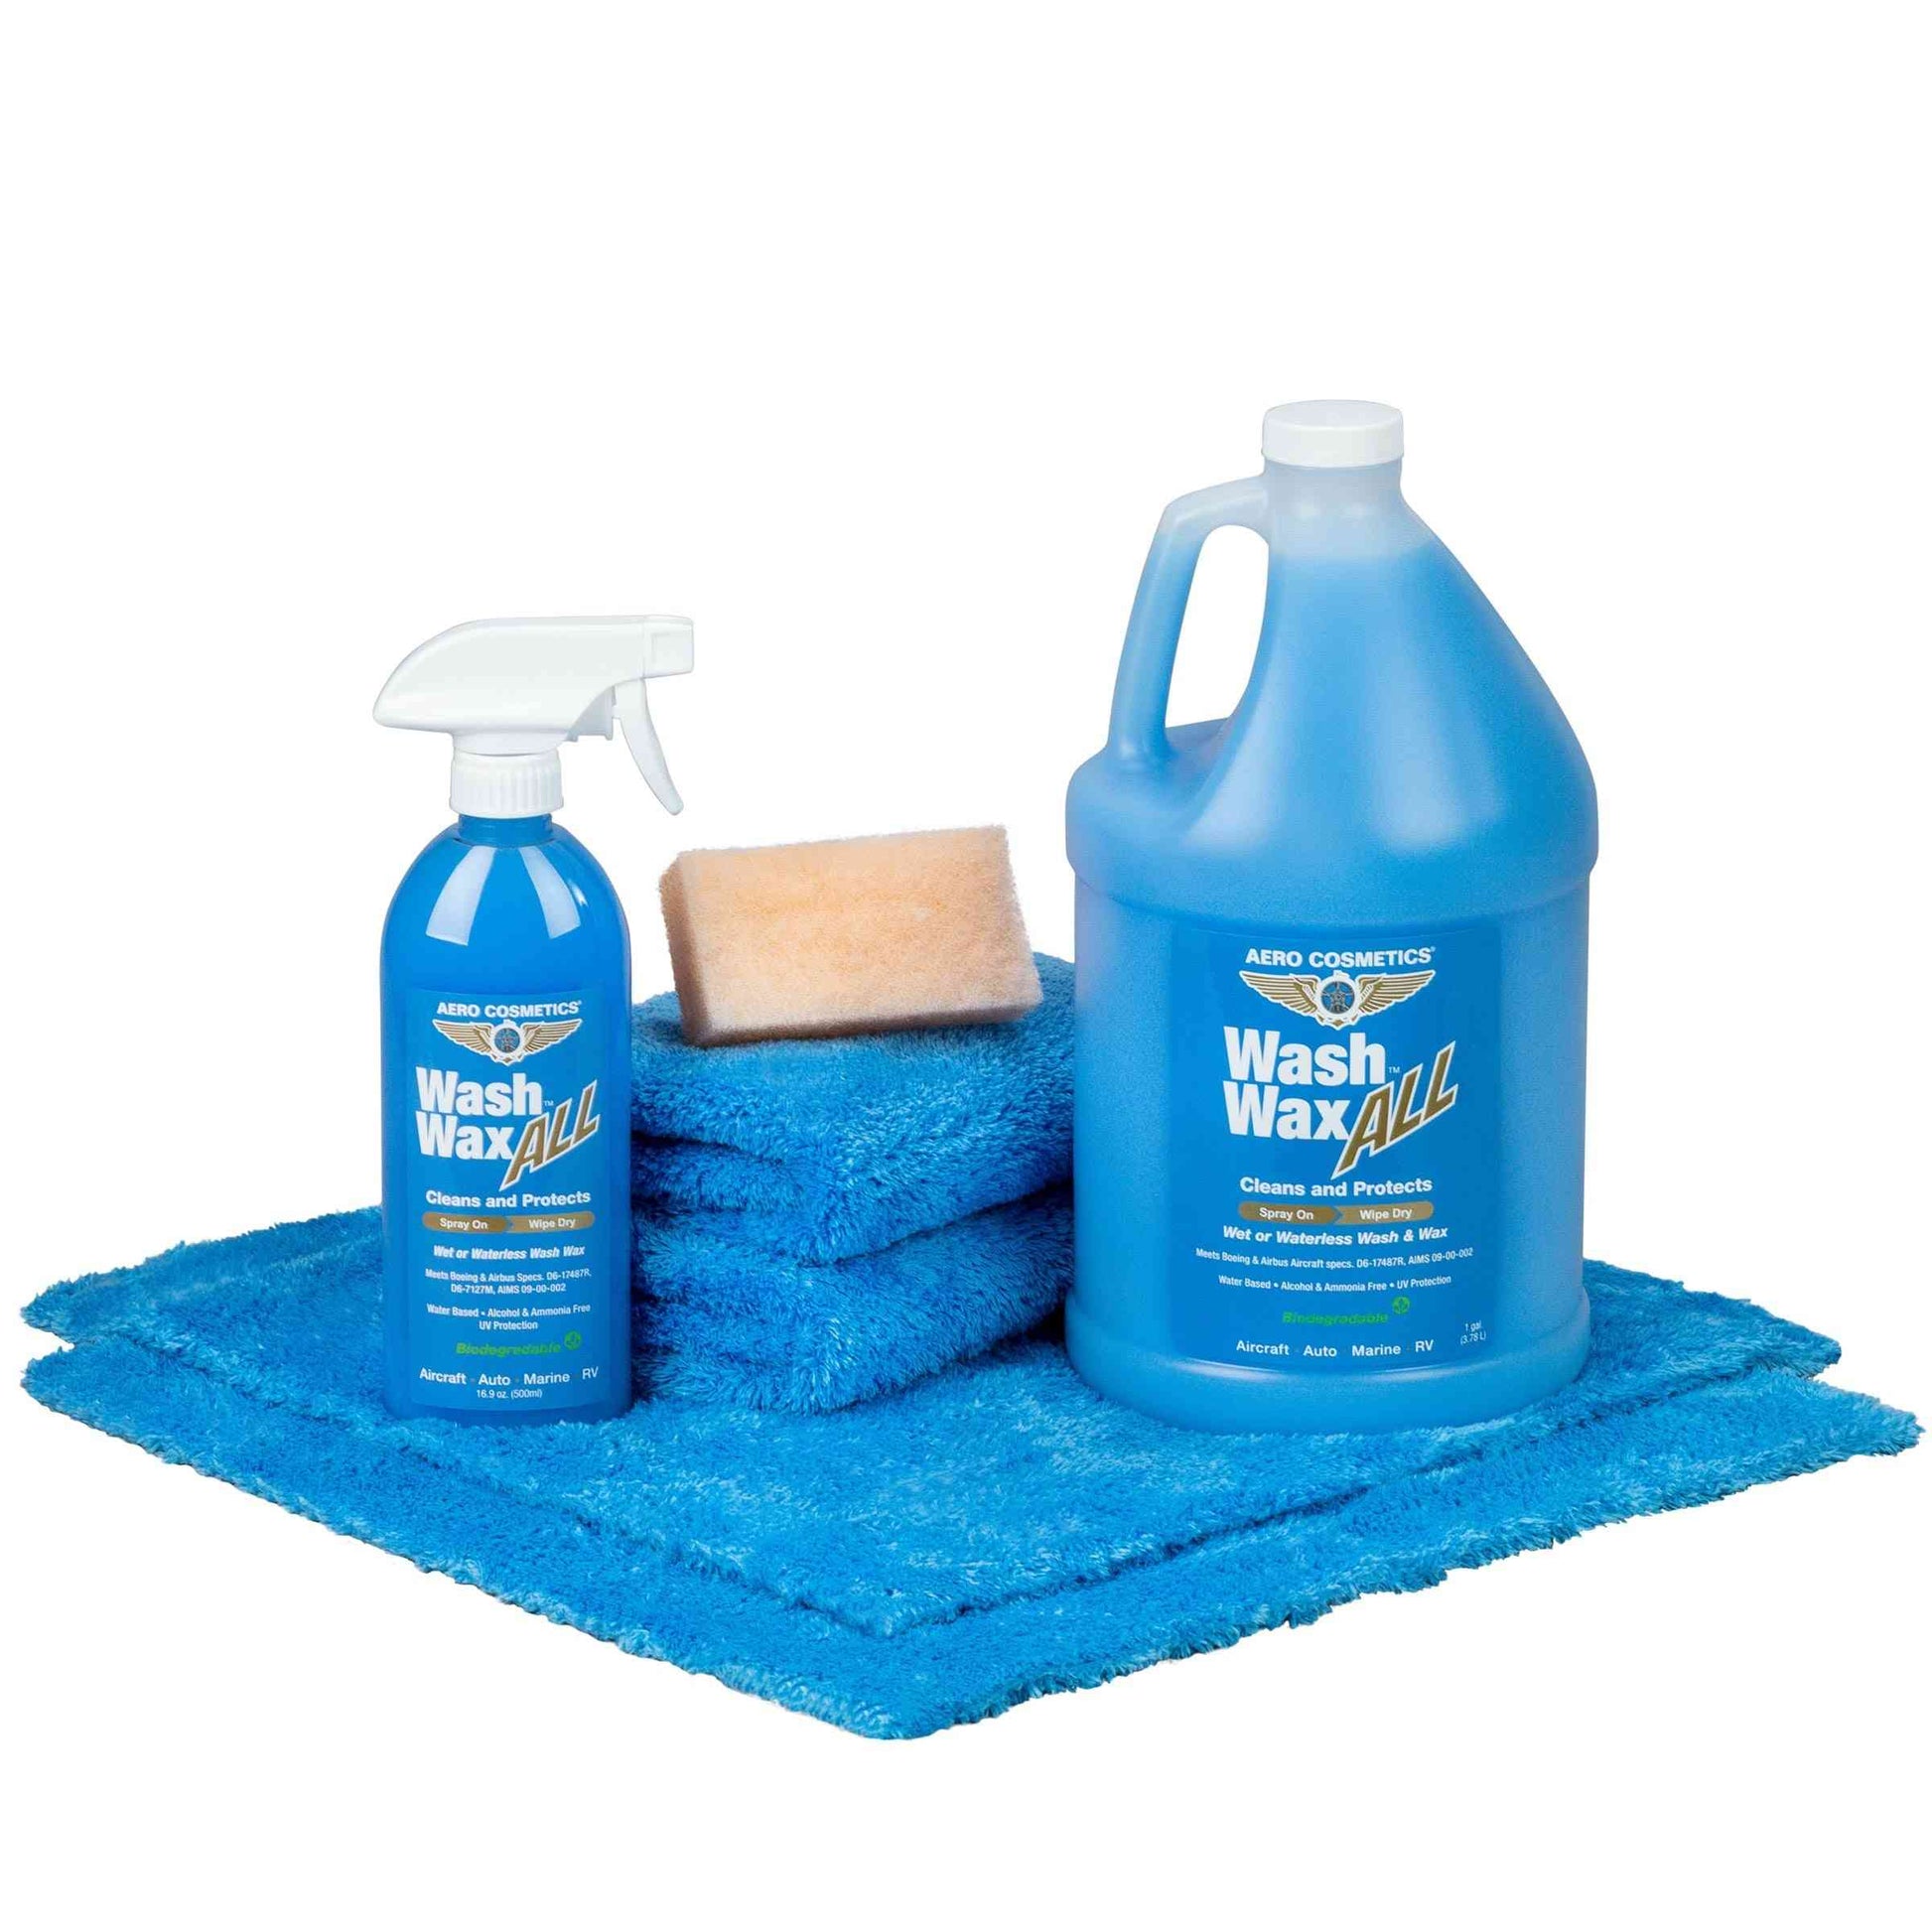 Premium Wet or Waterless Car Wash Wax Kit 144 Ounces. Aircraft Quality for Your Car, RV, Boat, Motorcycle. The Best Wash Wax. Anywhere, Anytime, Home, Office, School, Garage, Parking Lots. Aero Cosmetics